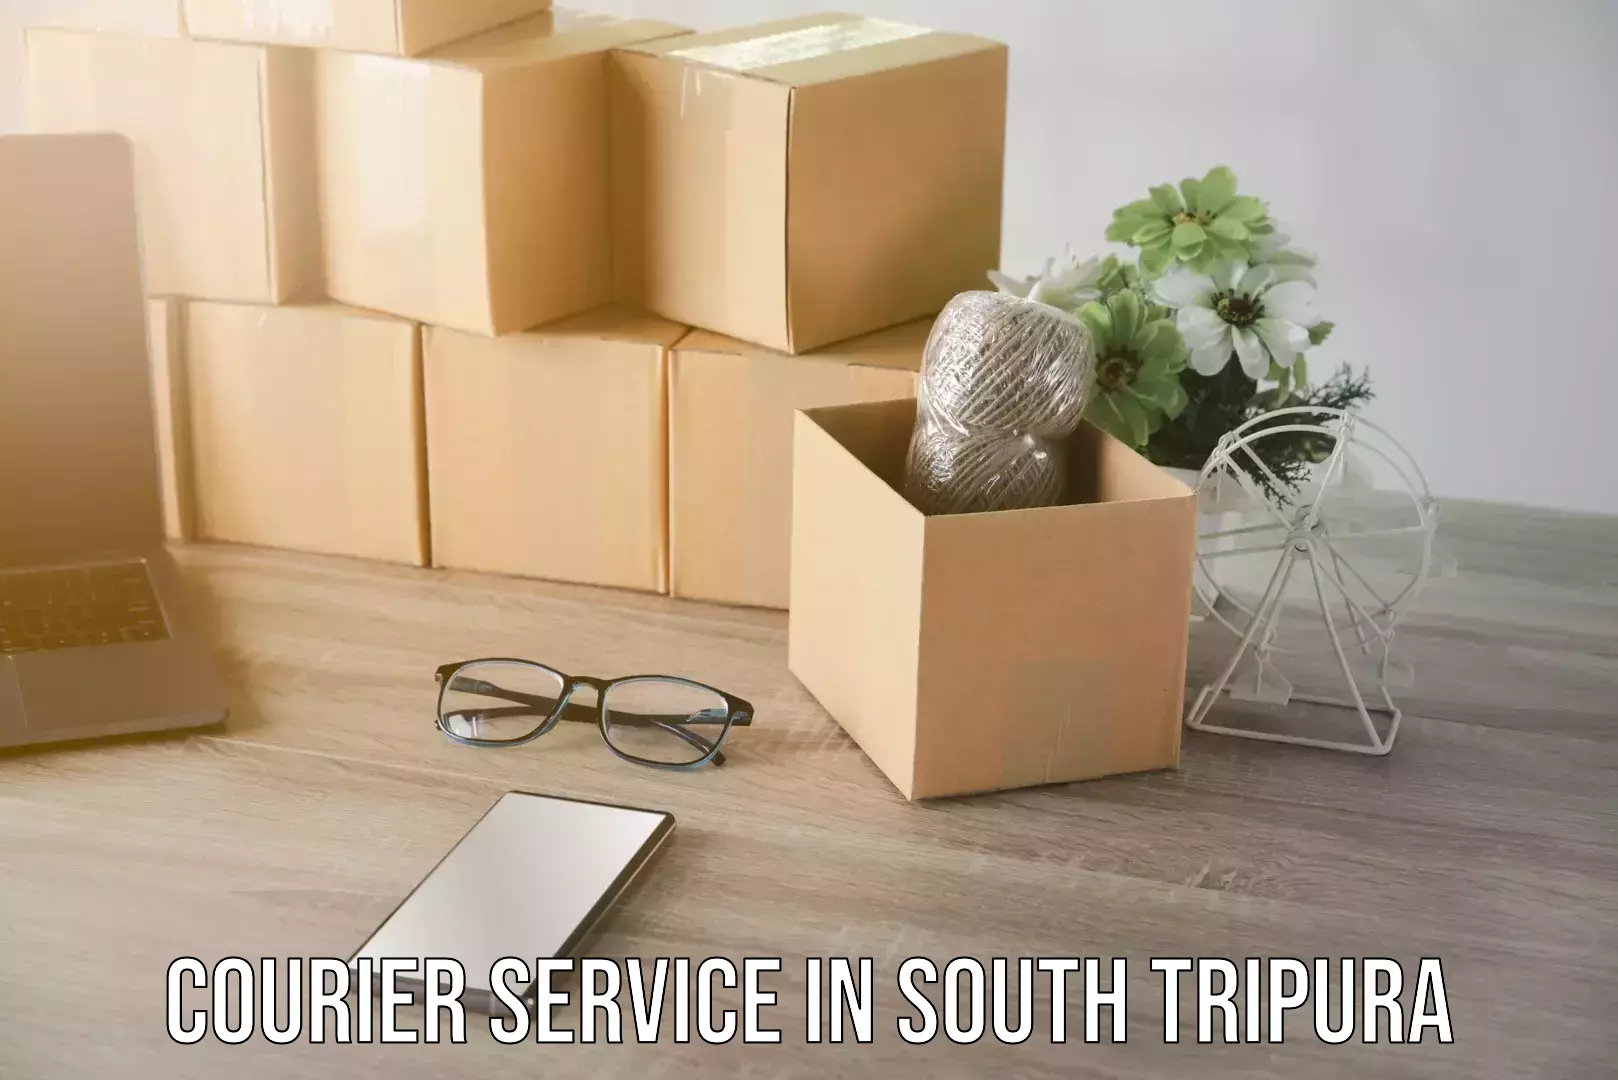 24-hour courier service in South Tripura